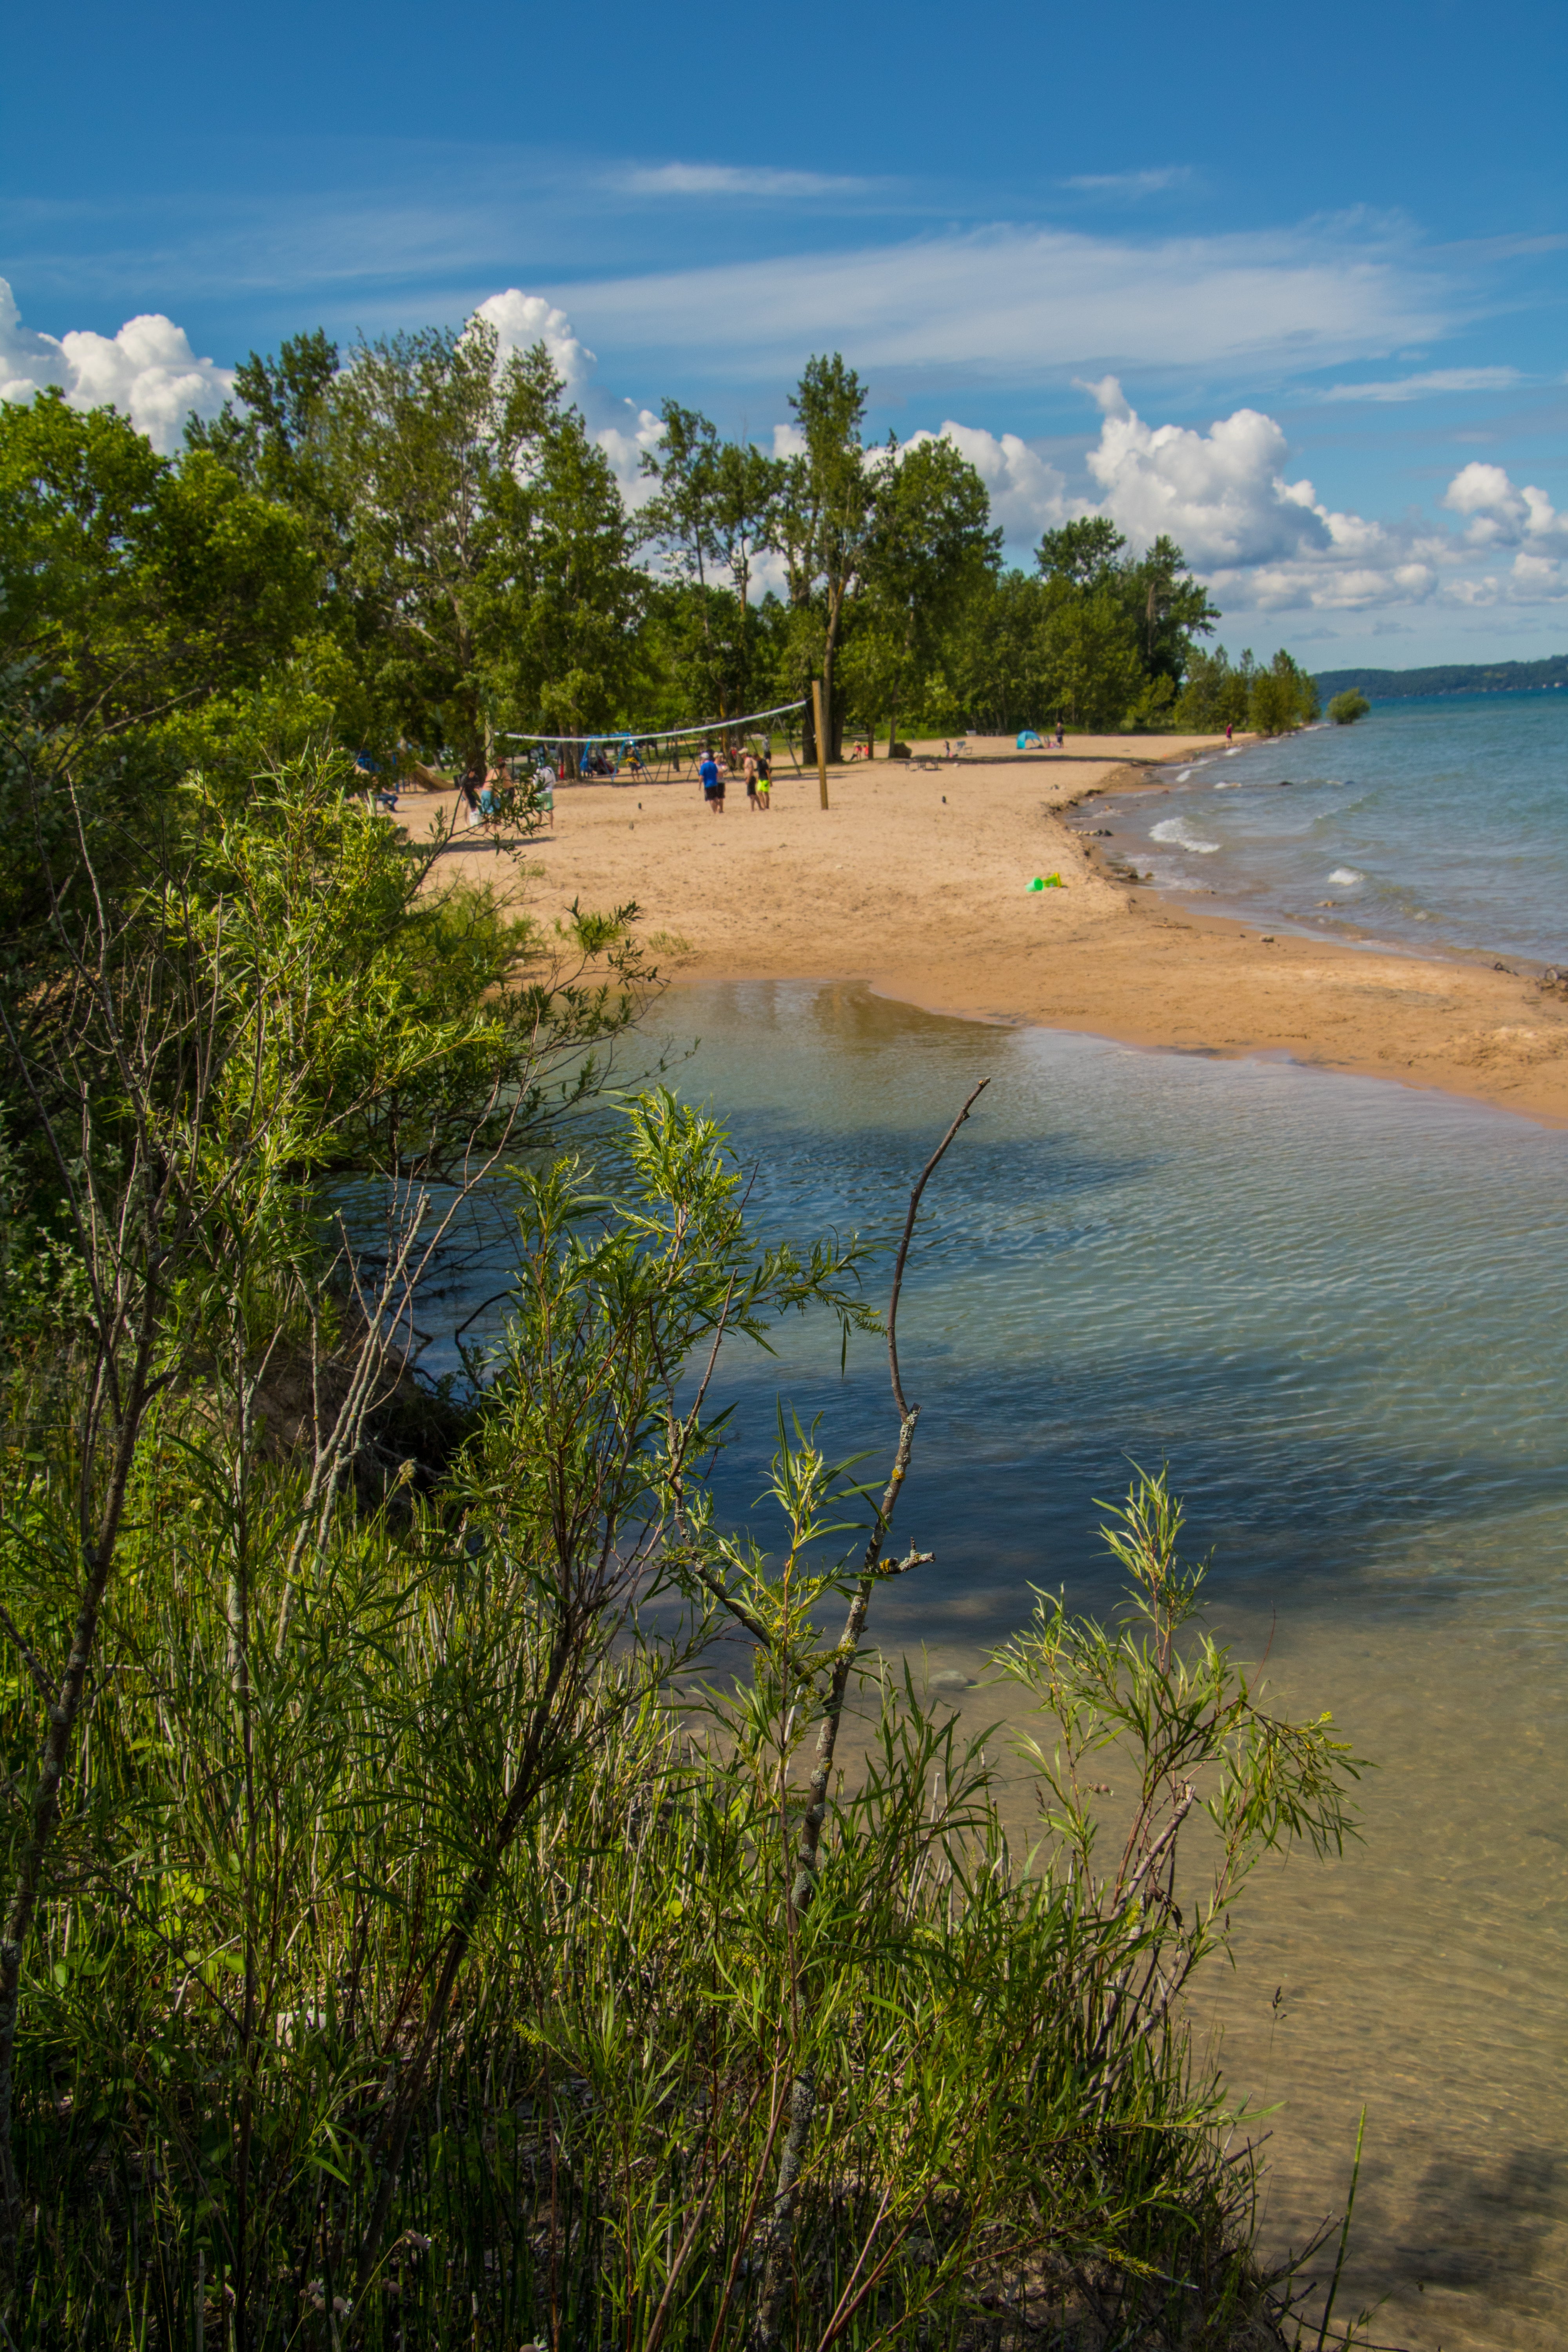 The shore of Grand Traverse Bay for all kinds of fun in the sun or to watch a gorgeous sunset!